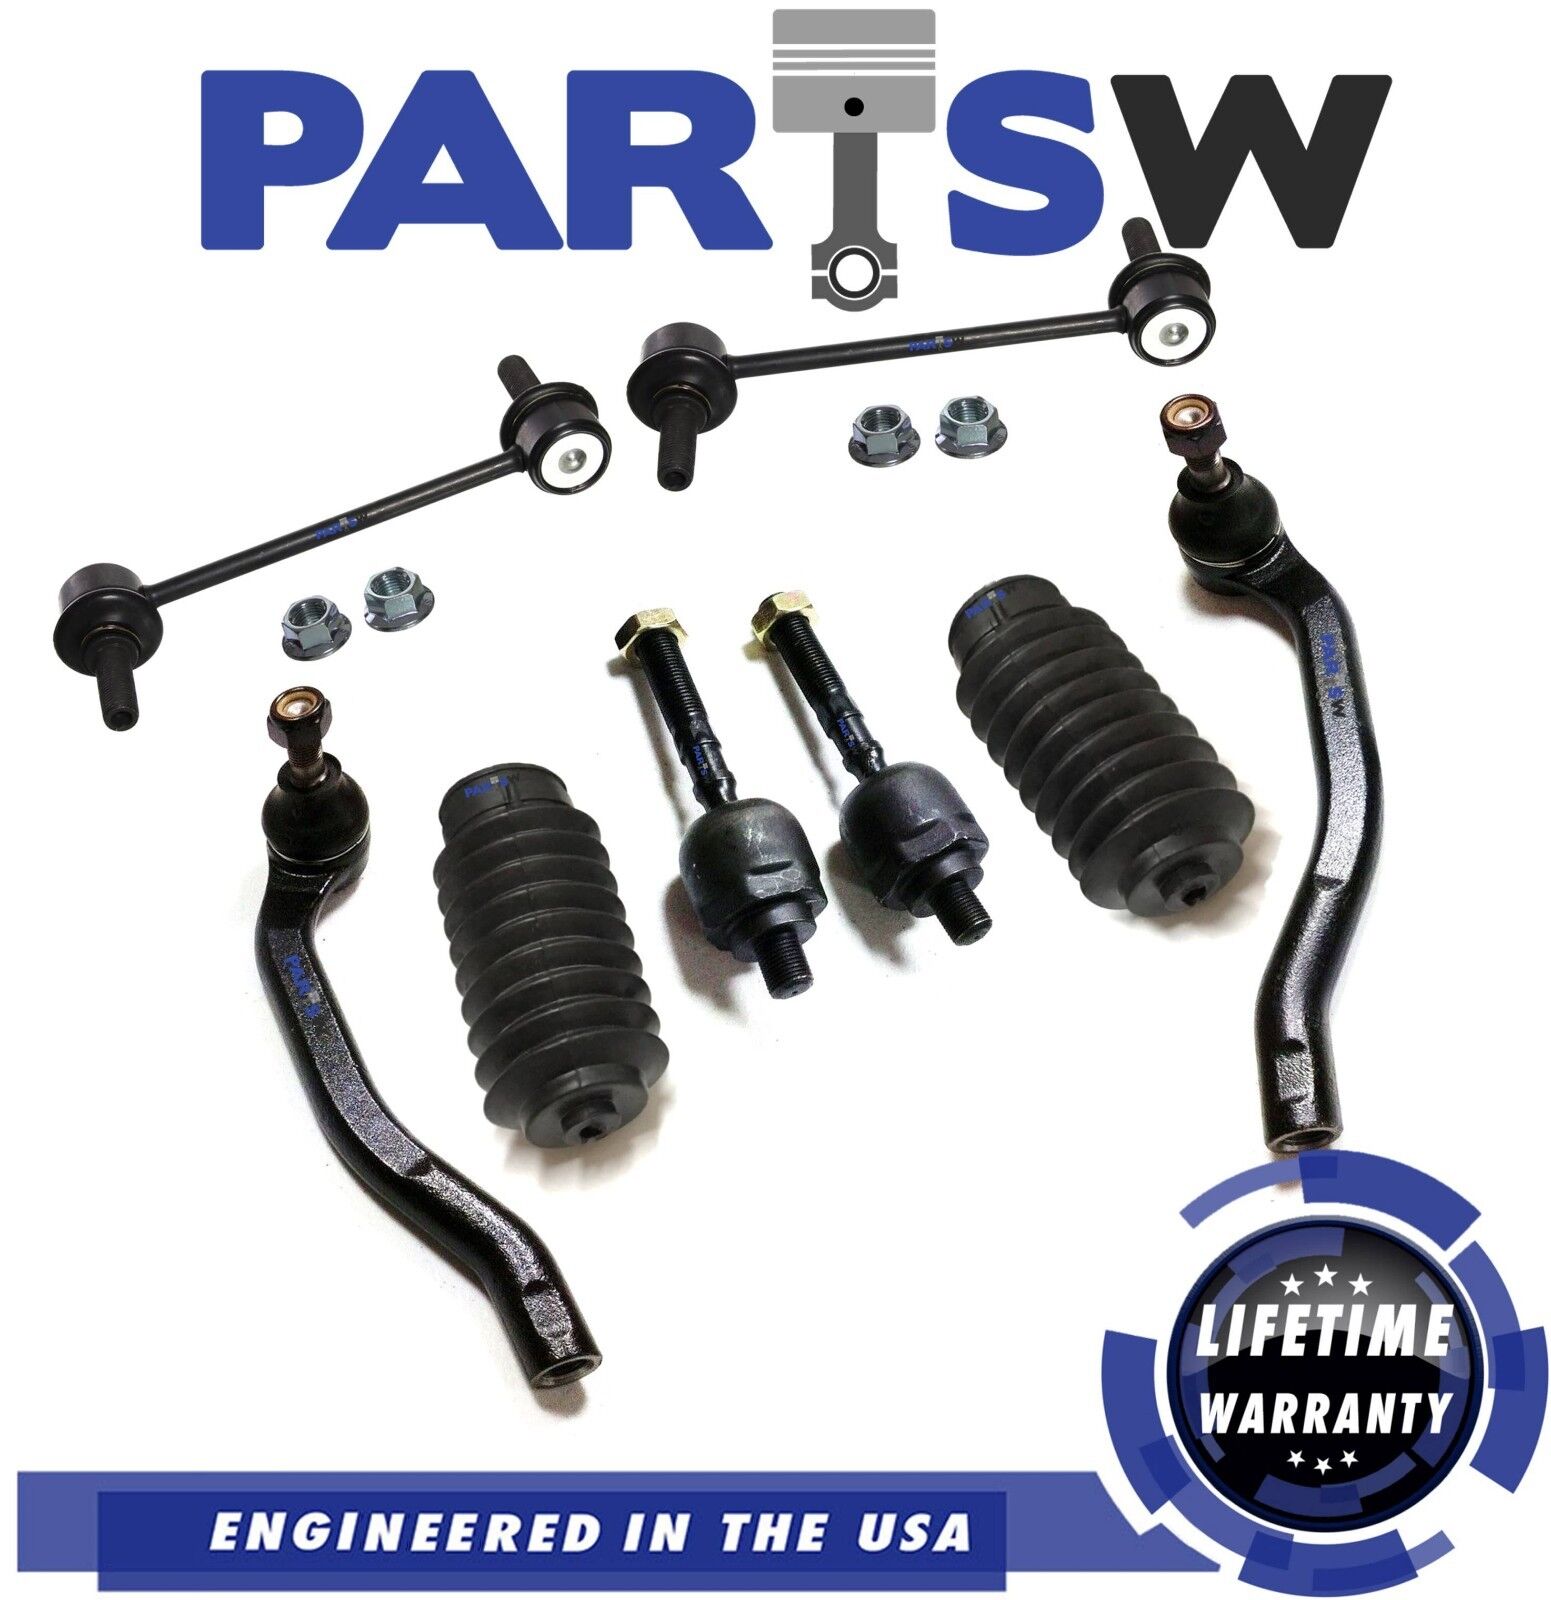 8 New Pc Suspension Kit for Honda Prelude Inner & Outer Tie Rod Ends, Sway Bar